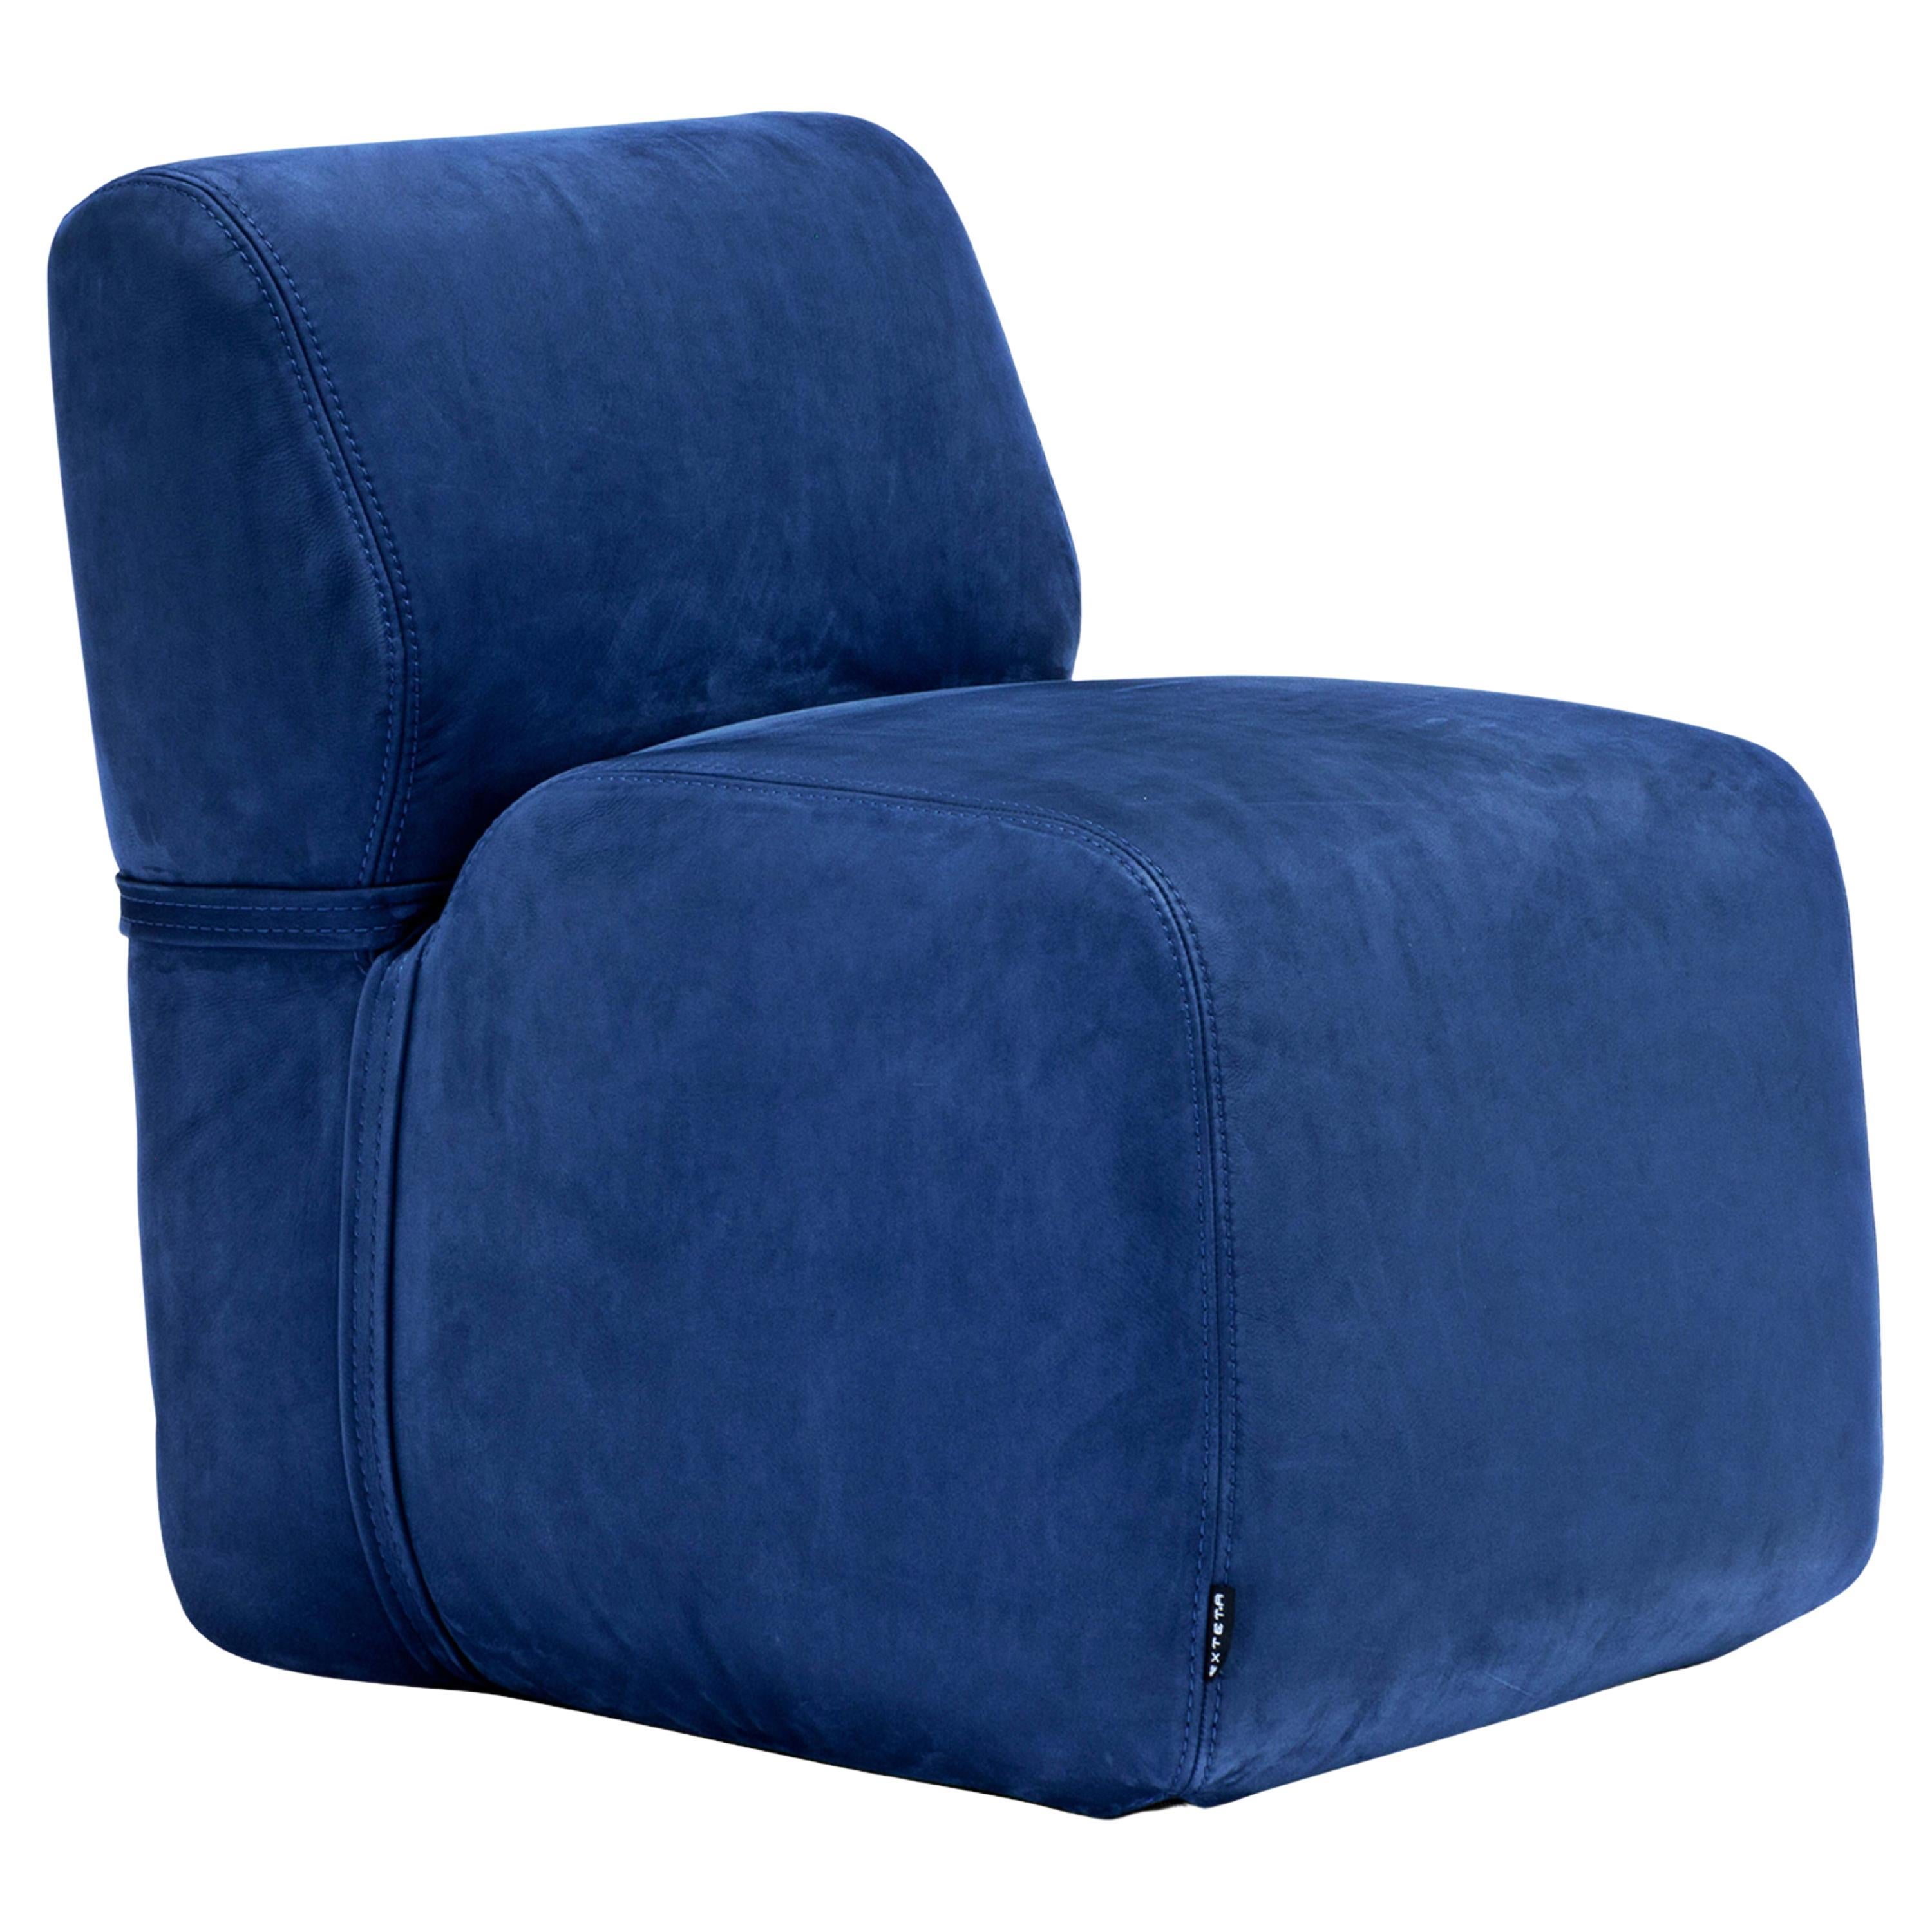 Soft Small Blue Lounge Chair For Sale At 1stdibs